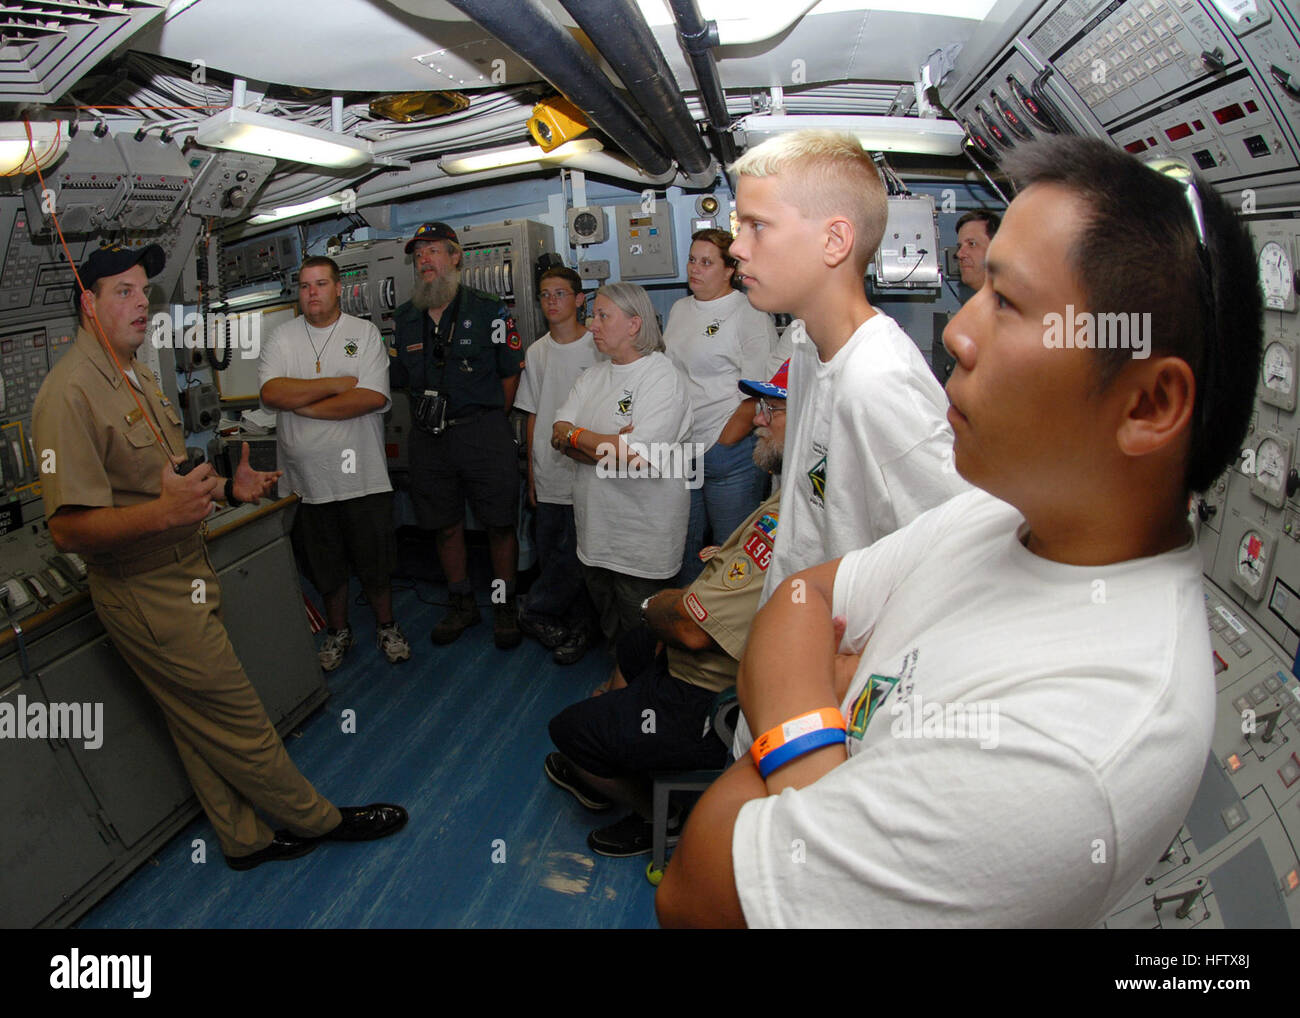 070809-N-9758L-021 PEARL HARBOR, Hawaii (Aug. 9, 2007) - Auxiliary officer, Lt. j.g. Scott Martin, assigned to the guided-missile frigate USS Reuben James (FFG 57), explains the controls and operation of the central control station to Boy Scouts and Troop Leaders from Boy Scout Venture Crew 457 Explorer Post 2195, in Toledo, Ohio, during a ship tour. The scouts interacted with the Sailors during their visit to learn more about life aboard a Navy ship. U.S. Navy photo by Mass Communication Specialist 3rd Class Michael A. Lantron (RELEASED) US Navy 070809-N-9758L-021 Auxiliary officer, Lt. j.g.  Stock Photo